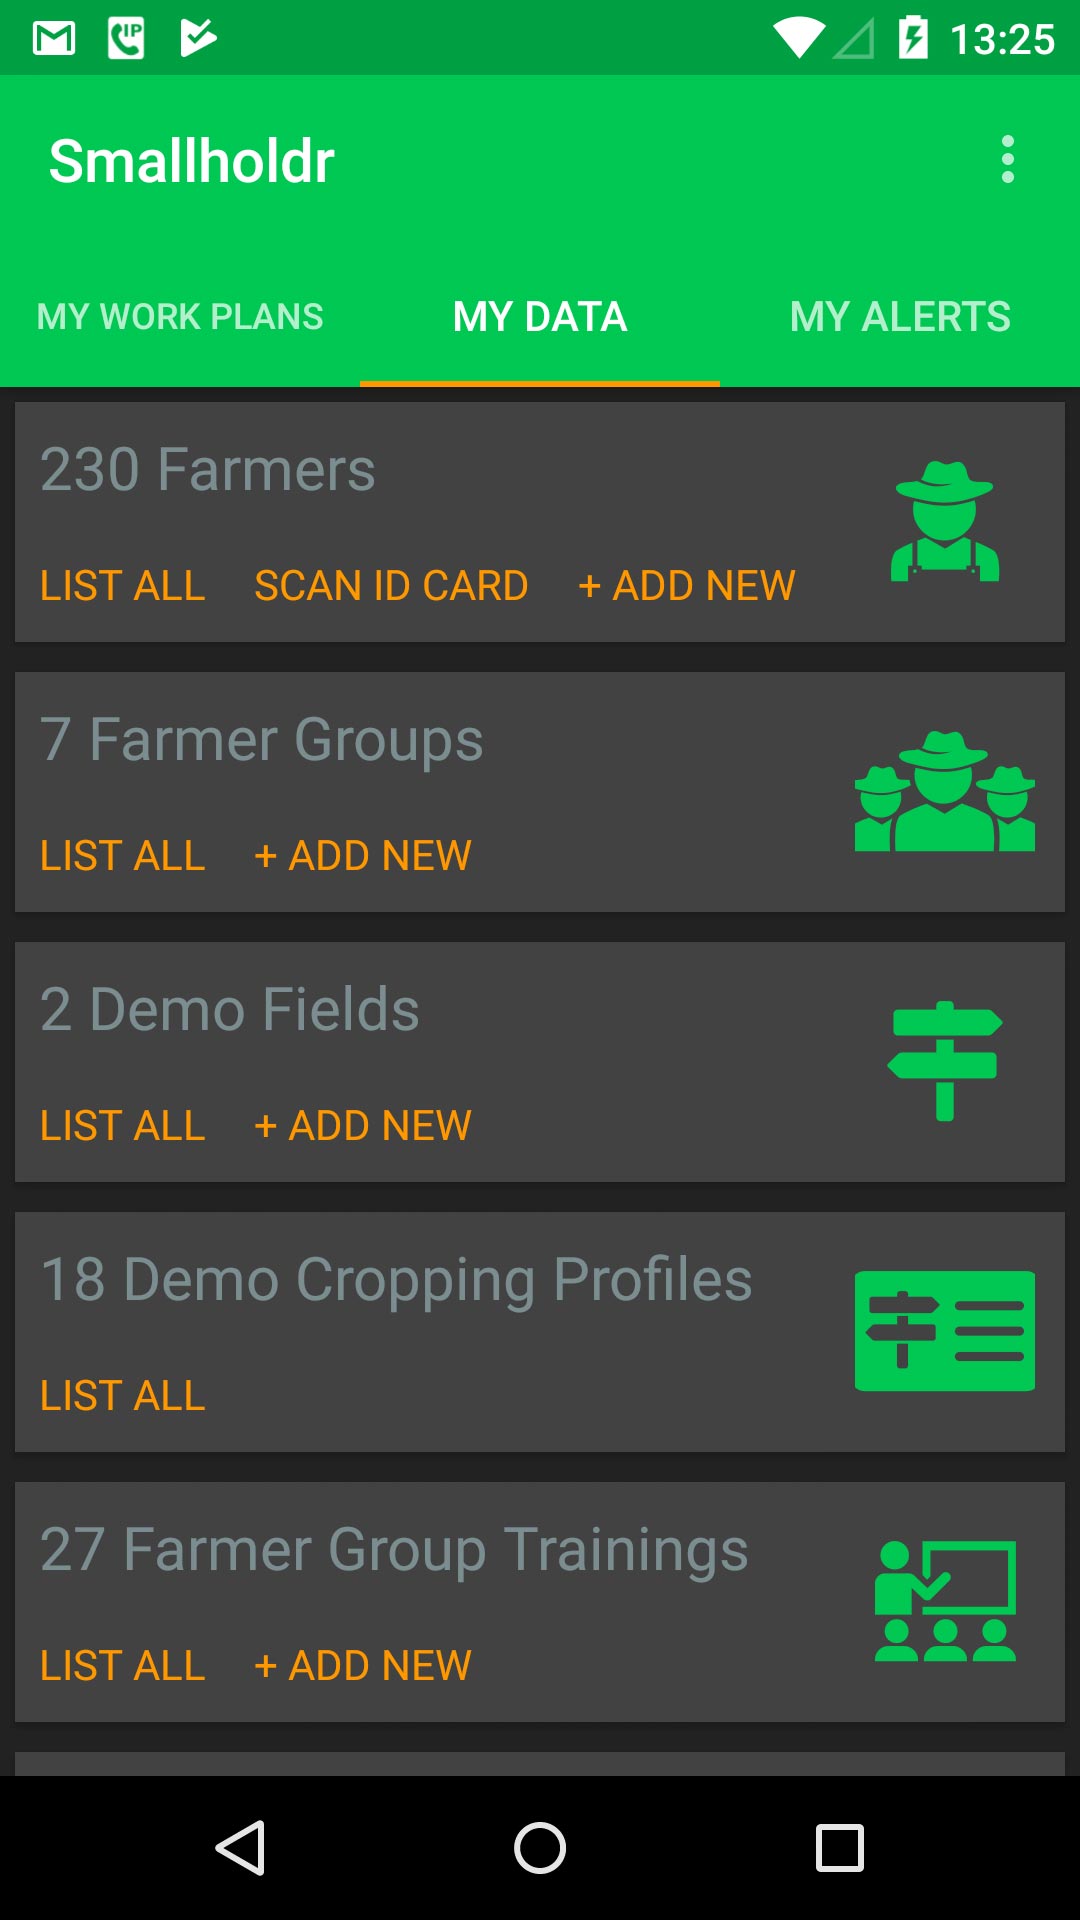 A typical Smallholdr mobile app screen :  Empowers the extension worker with key data at their fingertips.